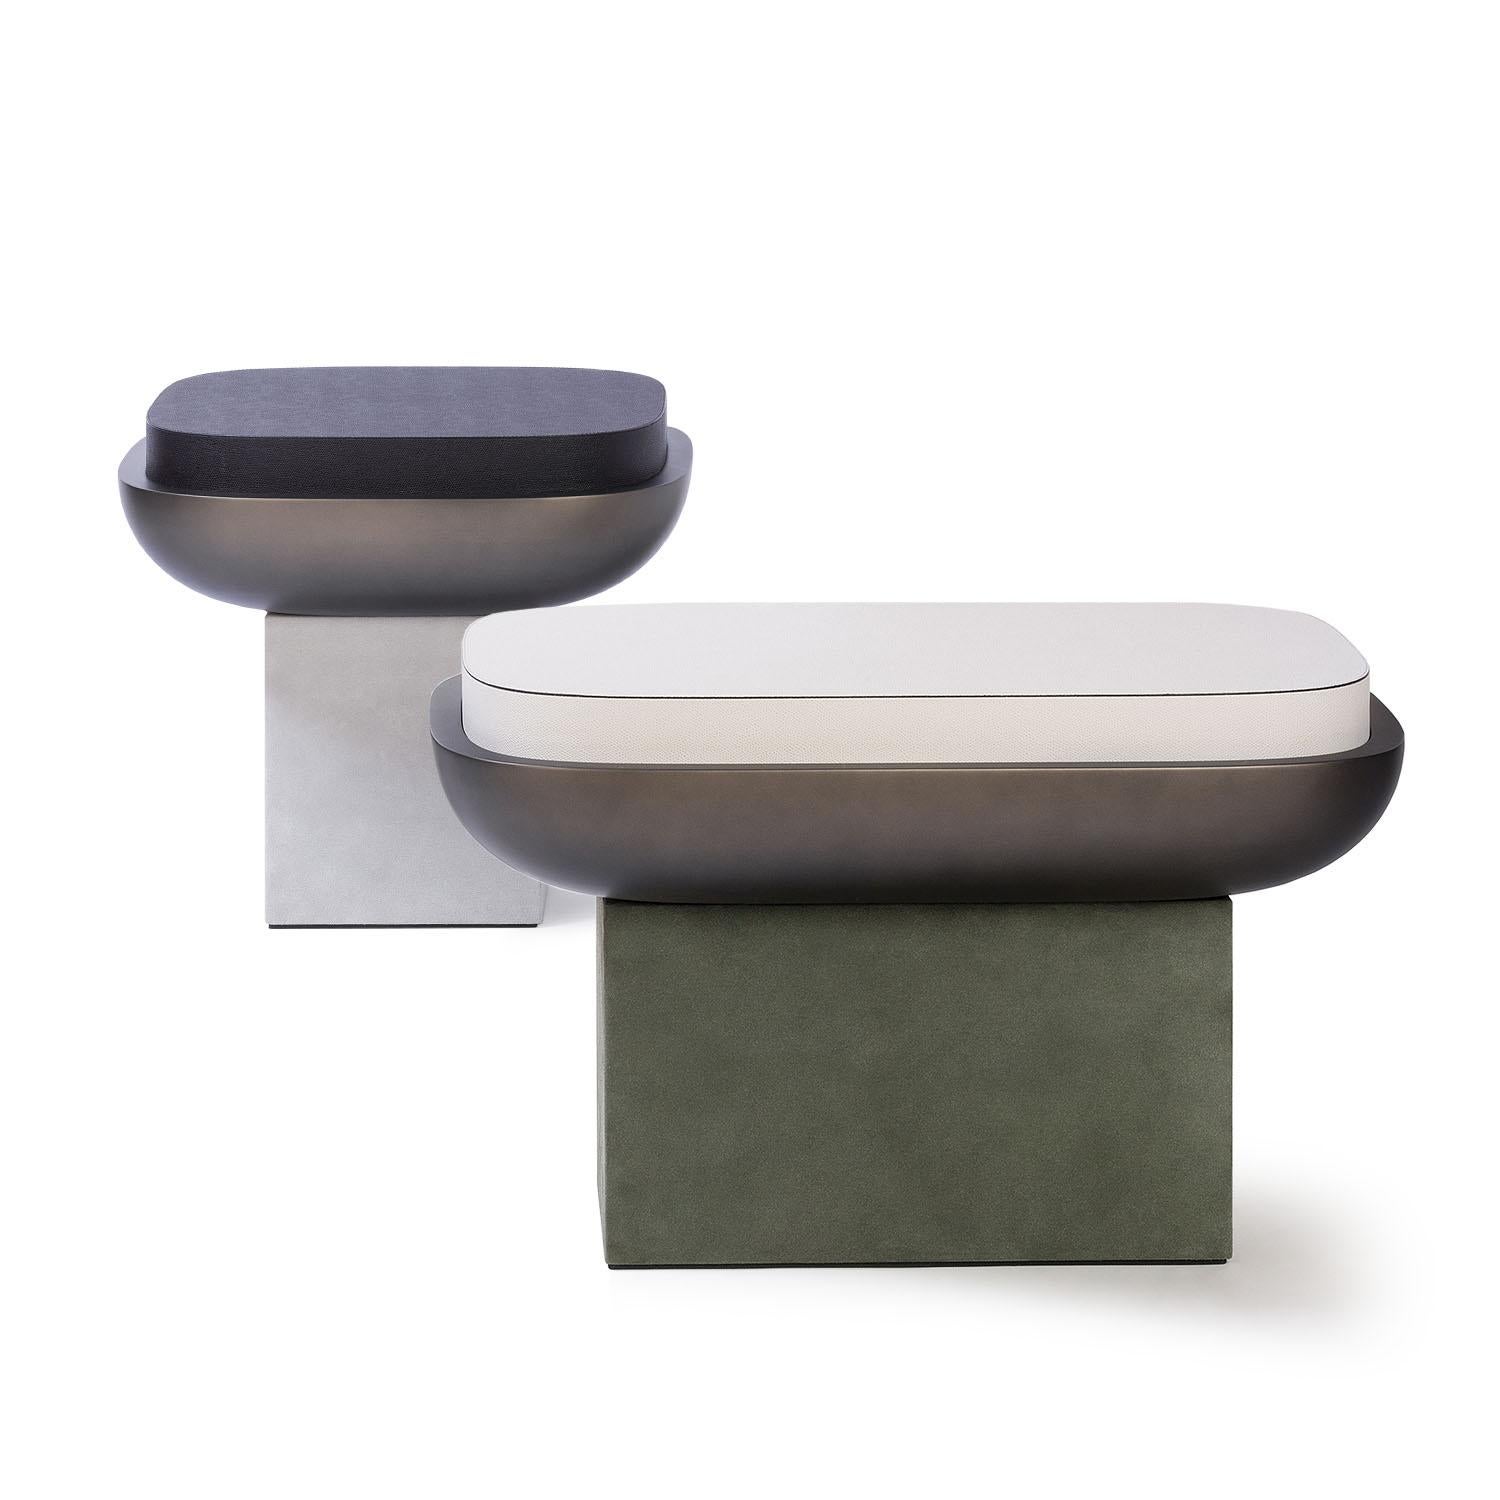 Contemporary square leather stool - Olympia by Stephane Parmentier for Giobagnara
The object presented in the image has following finish: G25 Moka Printed Calfskin Leather (top), A89 Feather Suede Leather (base) and Bronze-laquered Wood Seat